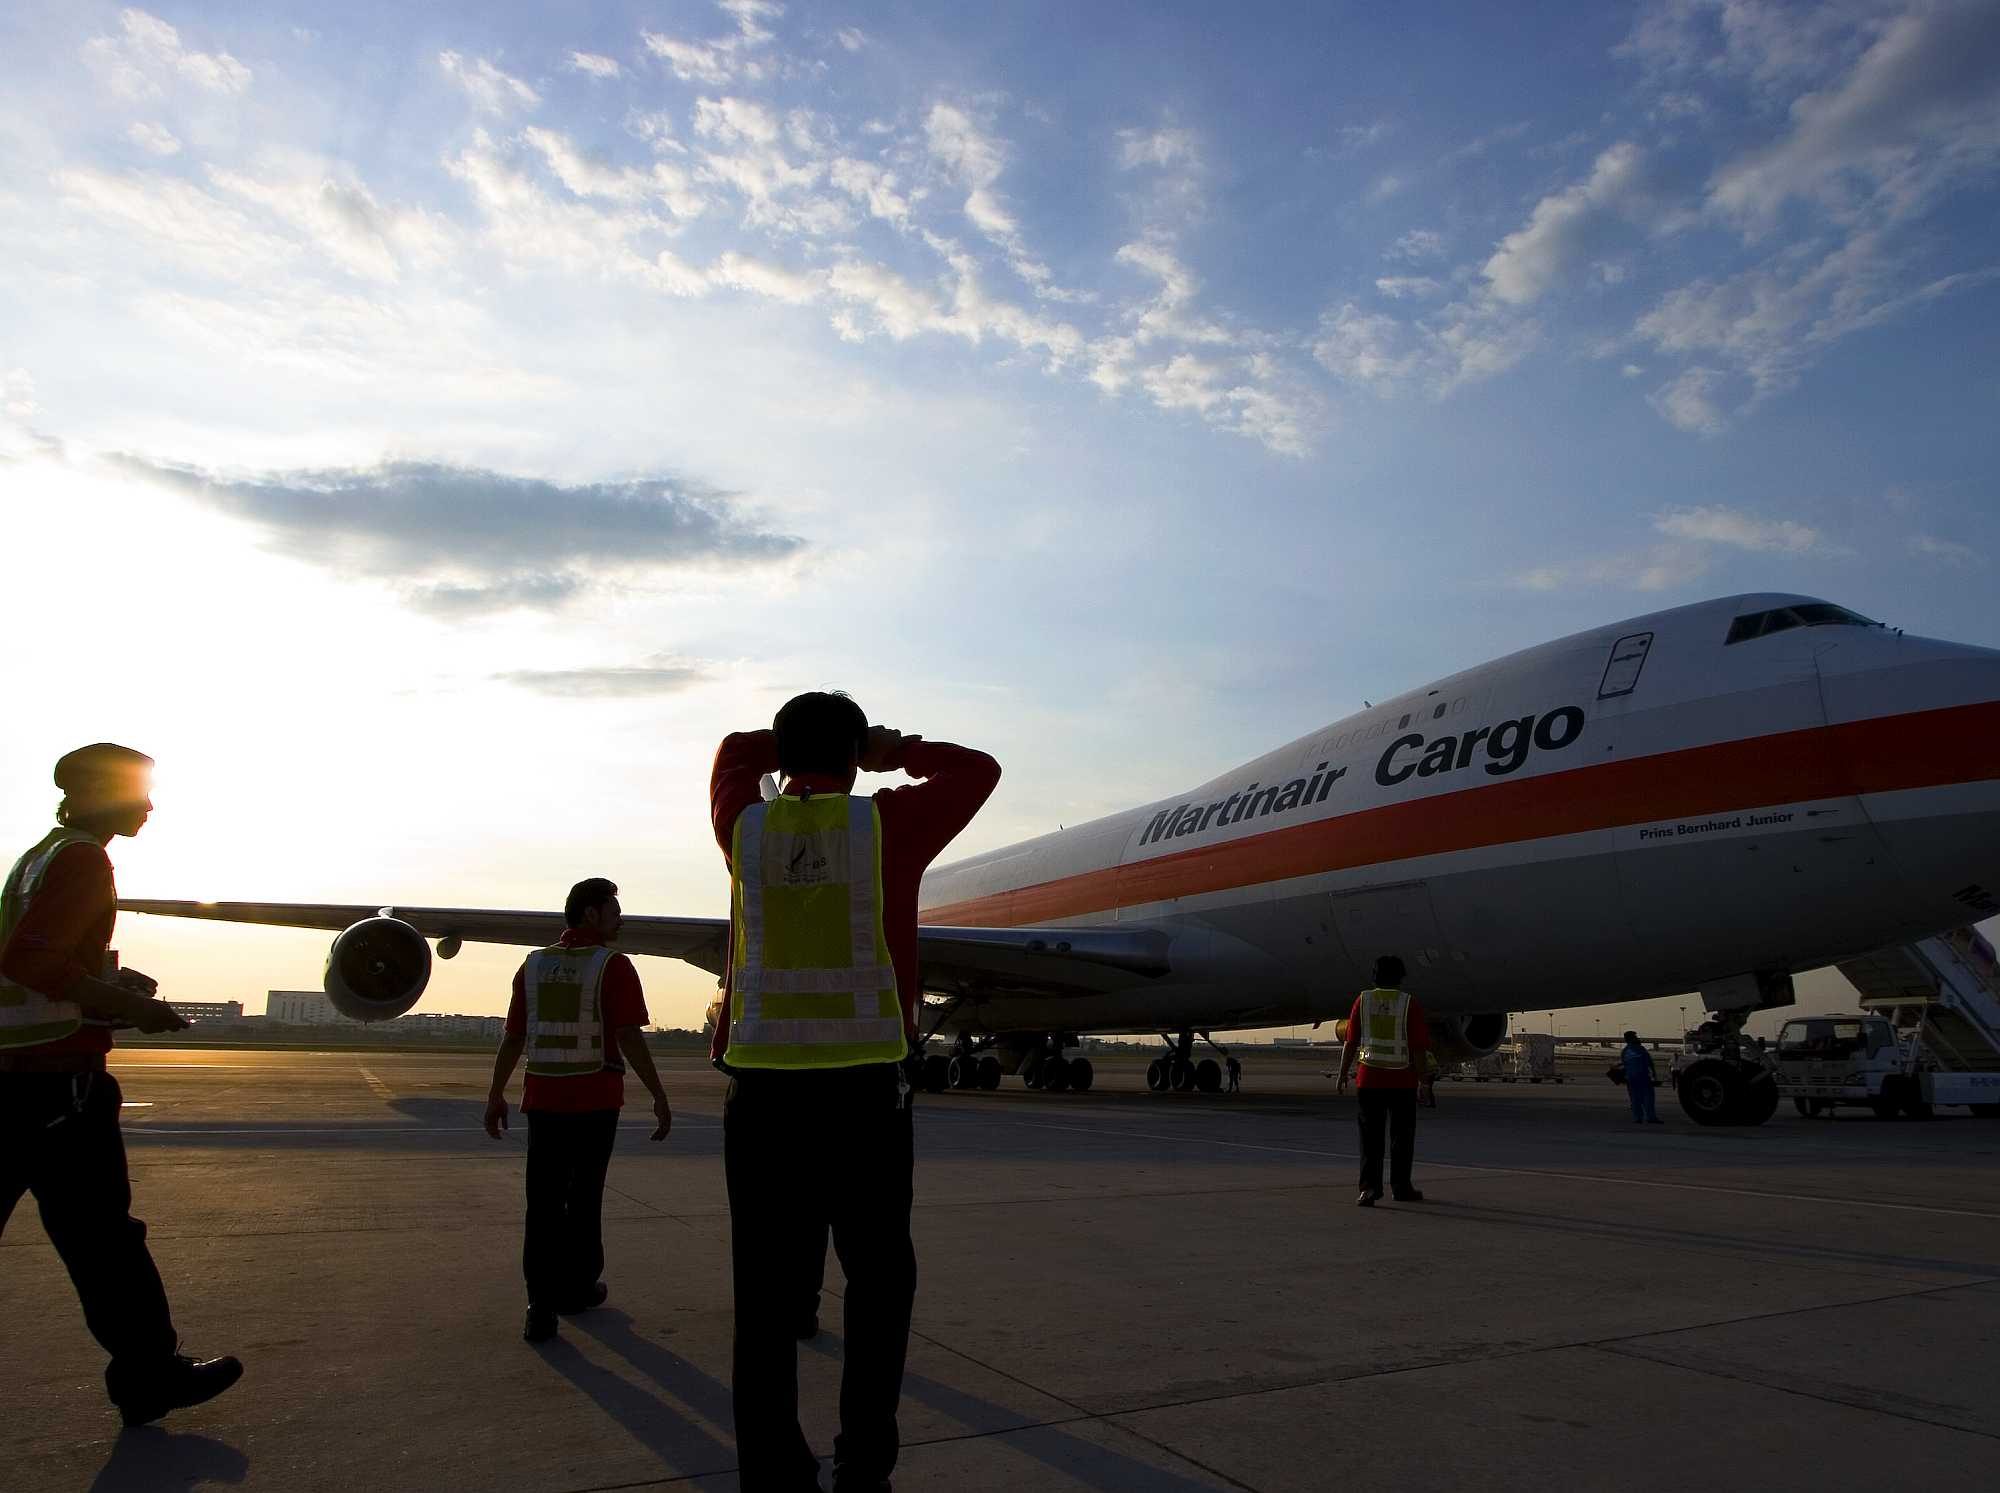 Brazilian airports are being privatized to raise cash